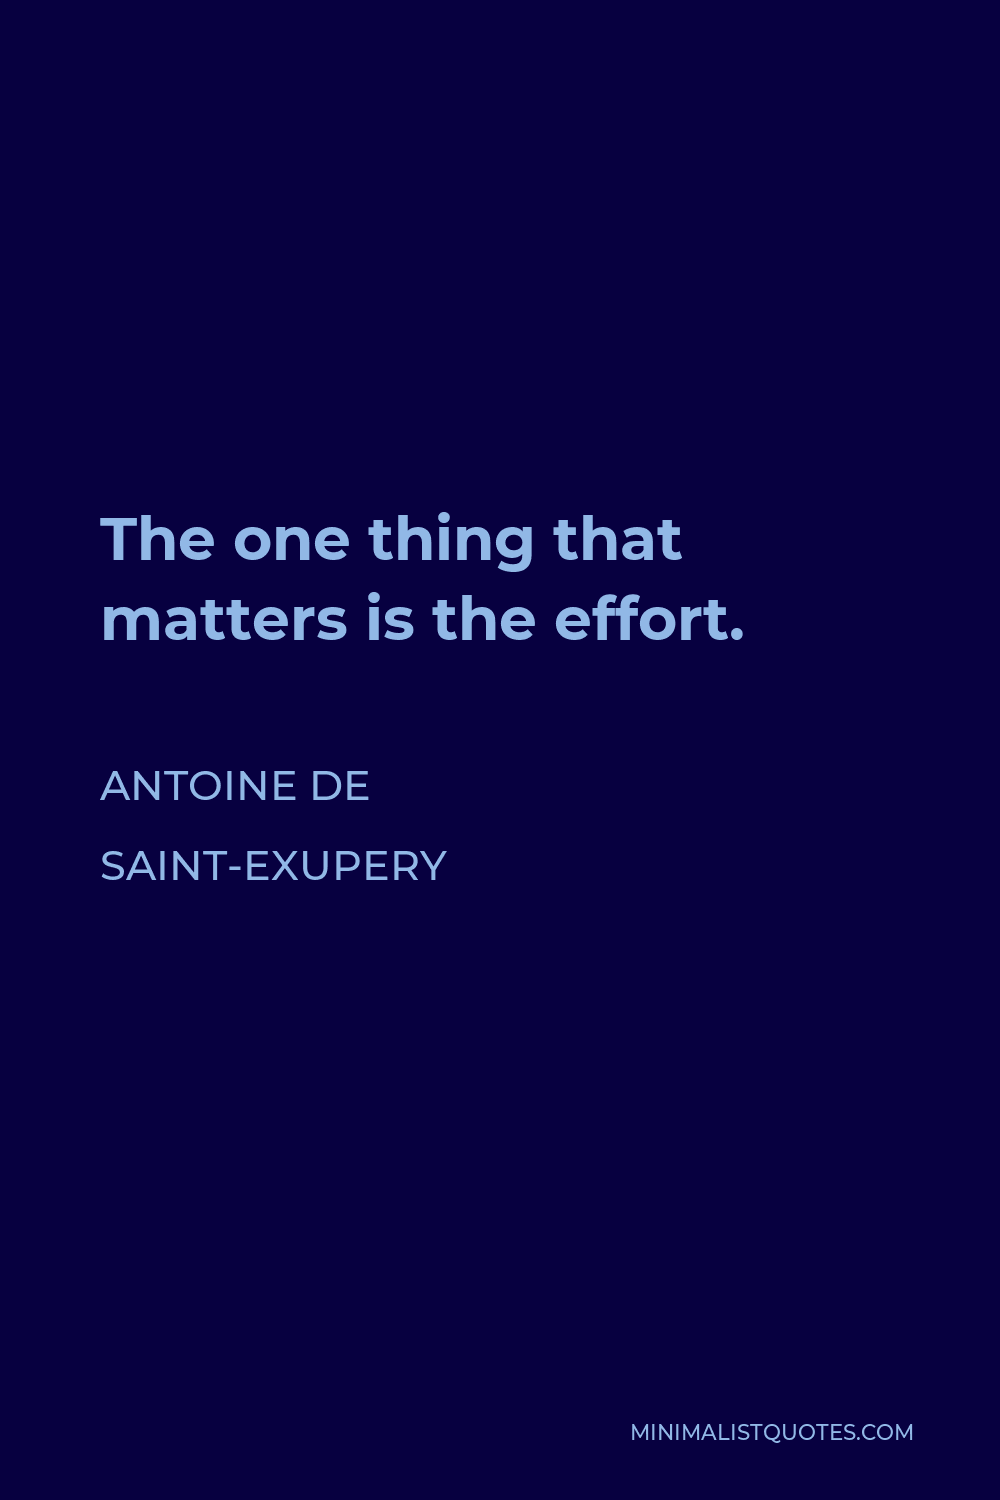 Antoine de Saint-Exupery Quote - The one thing that matters is the effort.